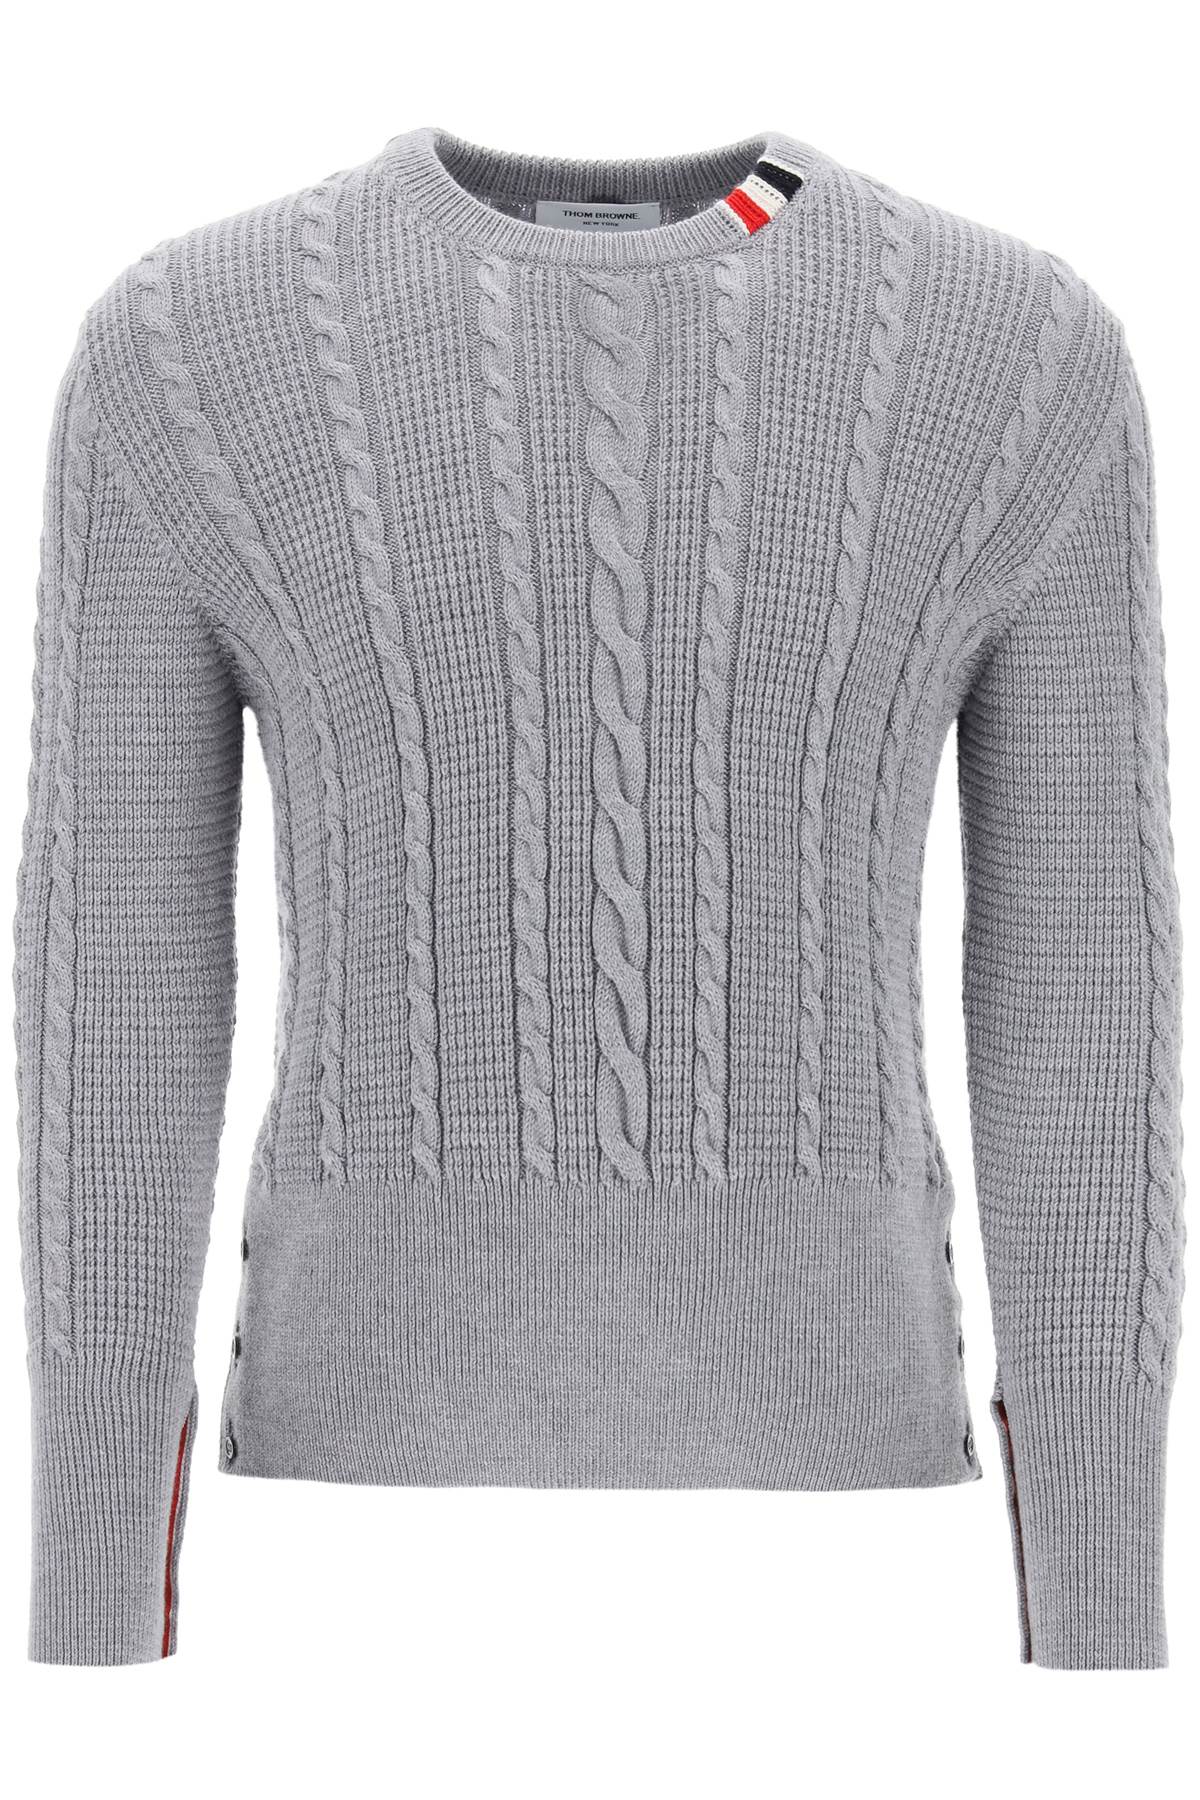 Thom browne cable wool sweater with rwb detail-0